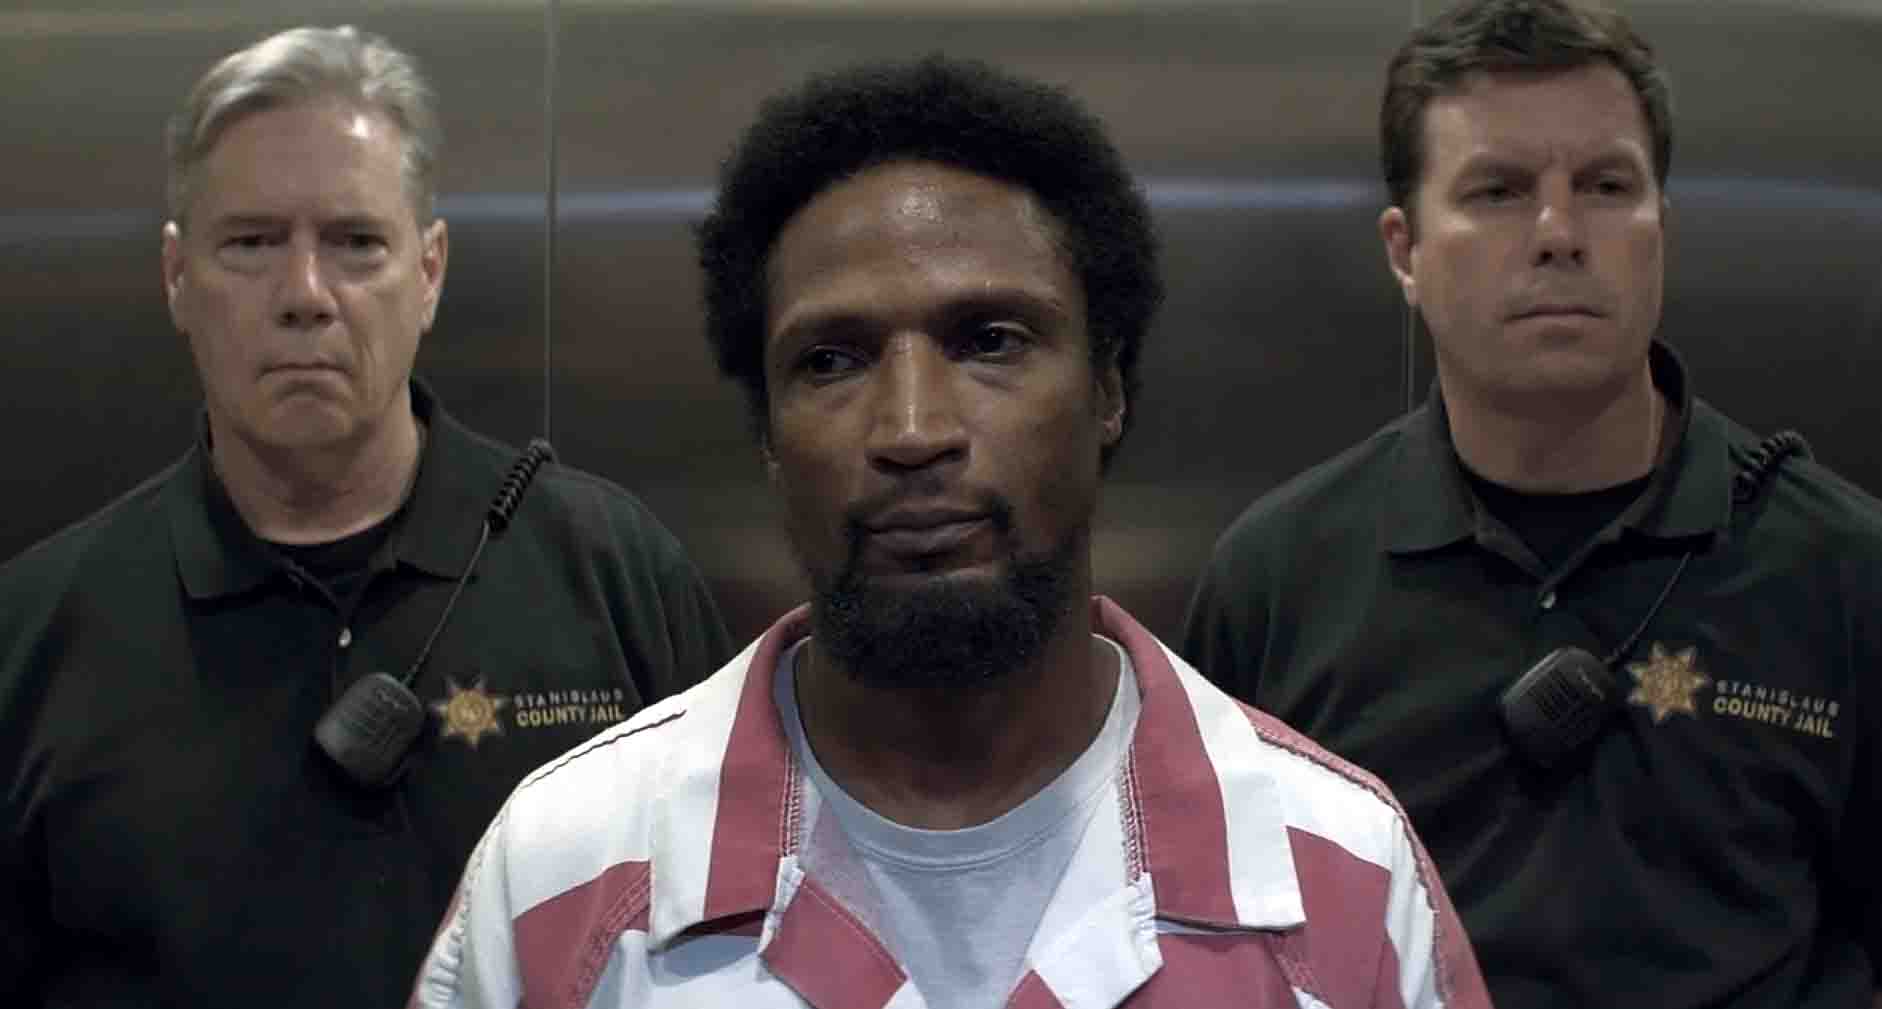 elevator scene from ABC's American Crime, Episode 9,with Elvis Nolasco and Klifton Kruger, aired April 30, 2015